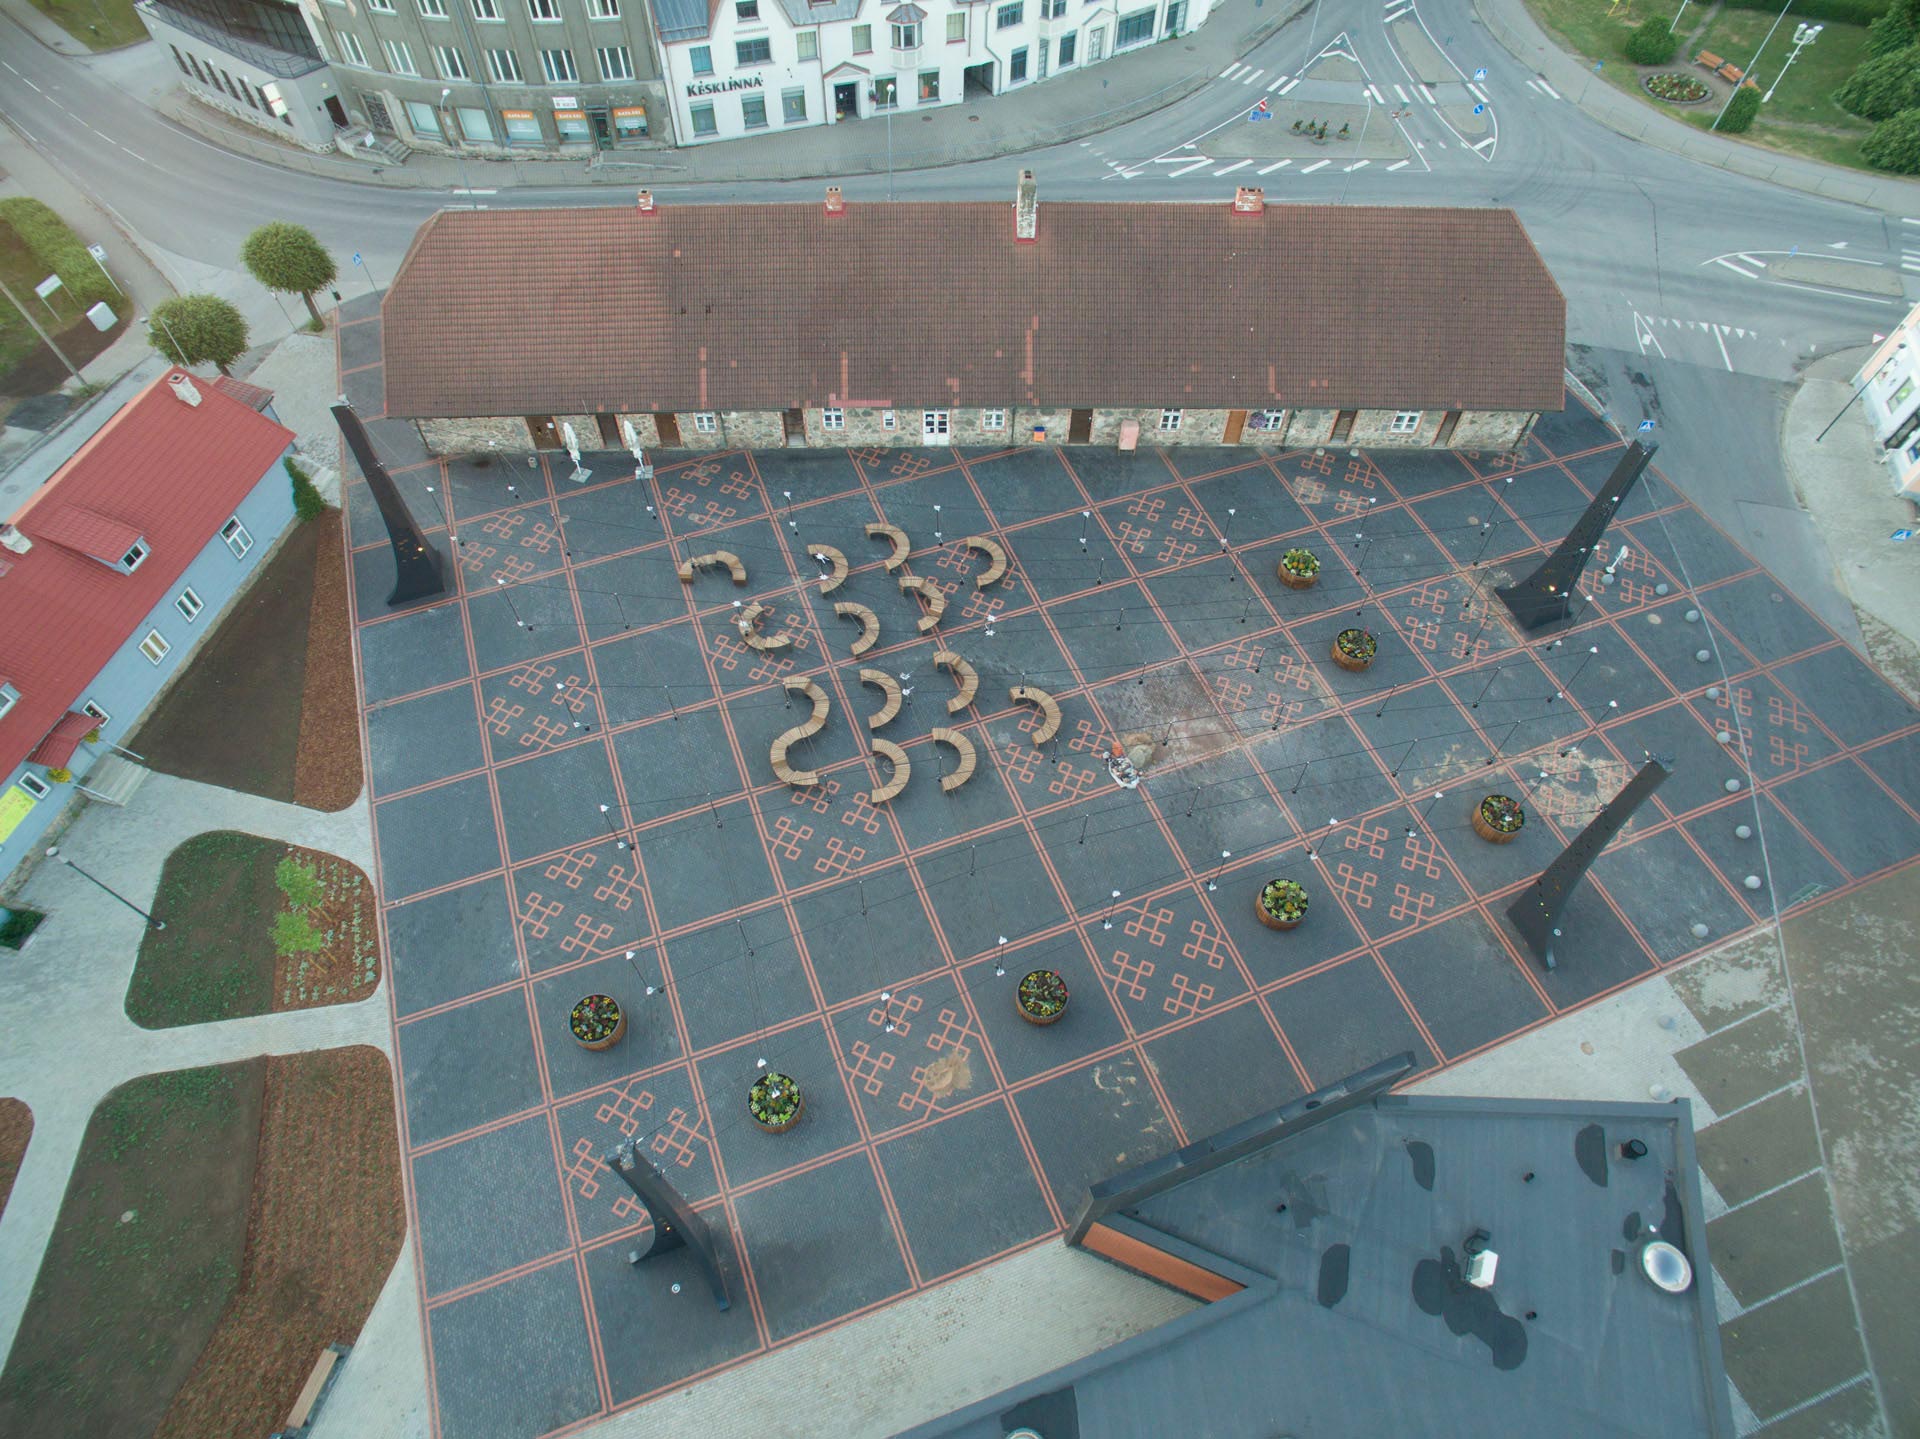 The Tõrva Centre Square from above with a top-down view of the cable installation